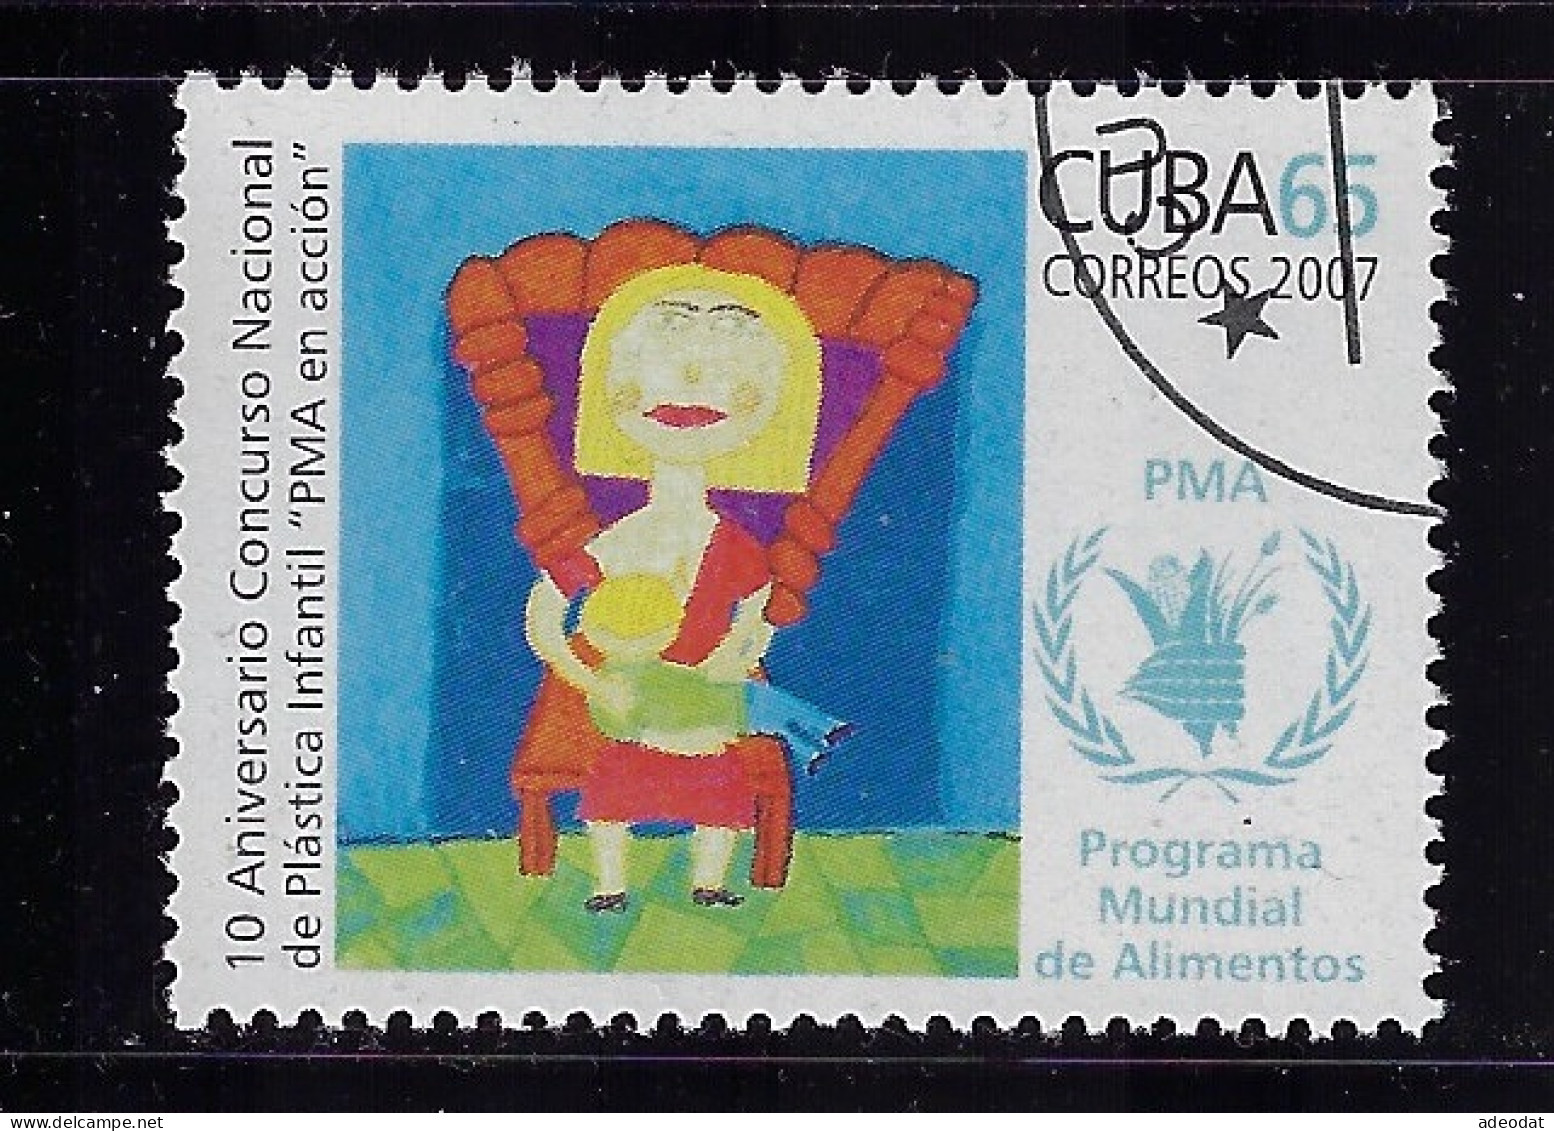 CUBA 2007 SCOTT 4701 CANCELLED - Used Stamps